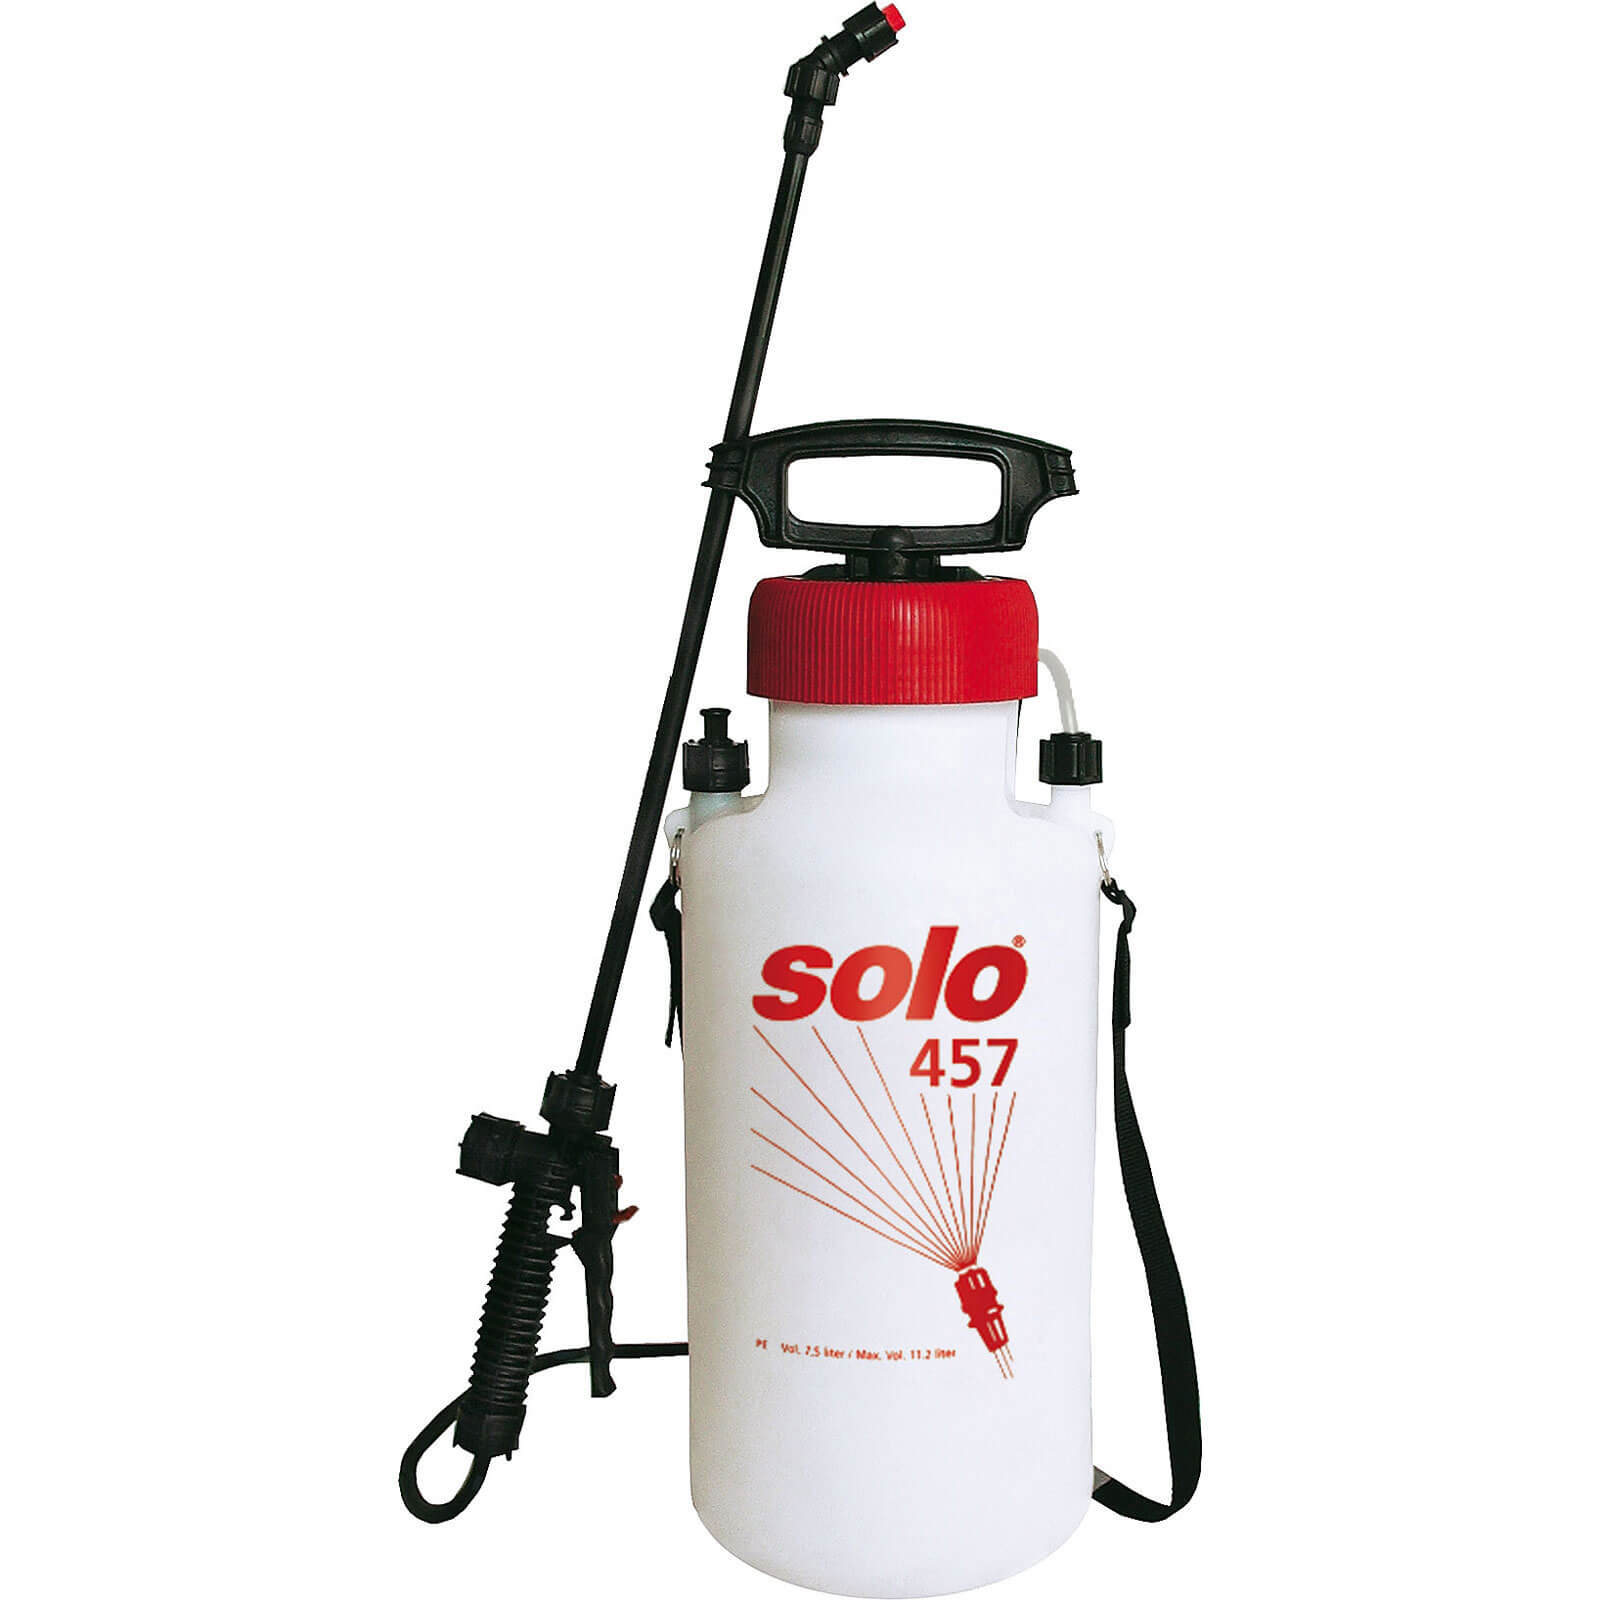 Image of Solo 457 PRO Chemical and Water Pressure Sprayer 9l